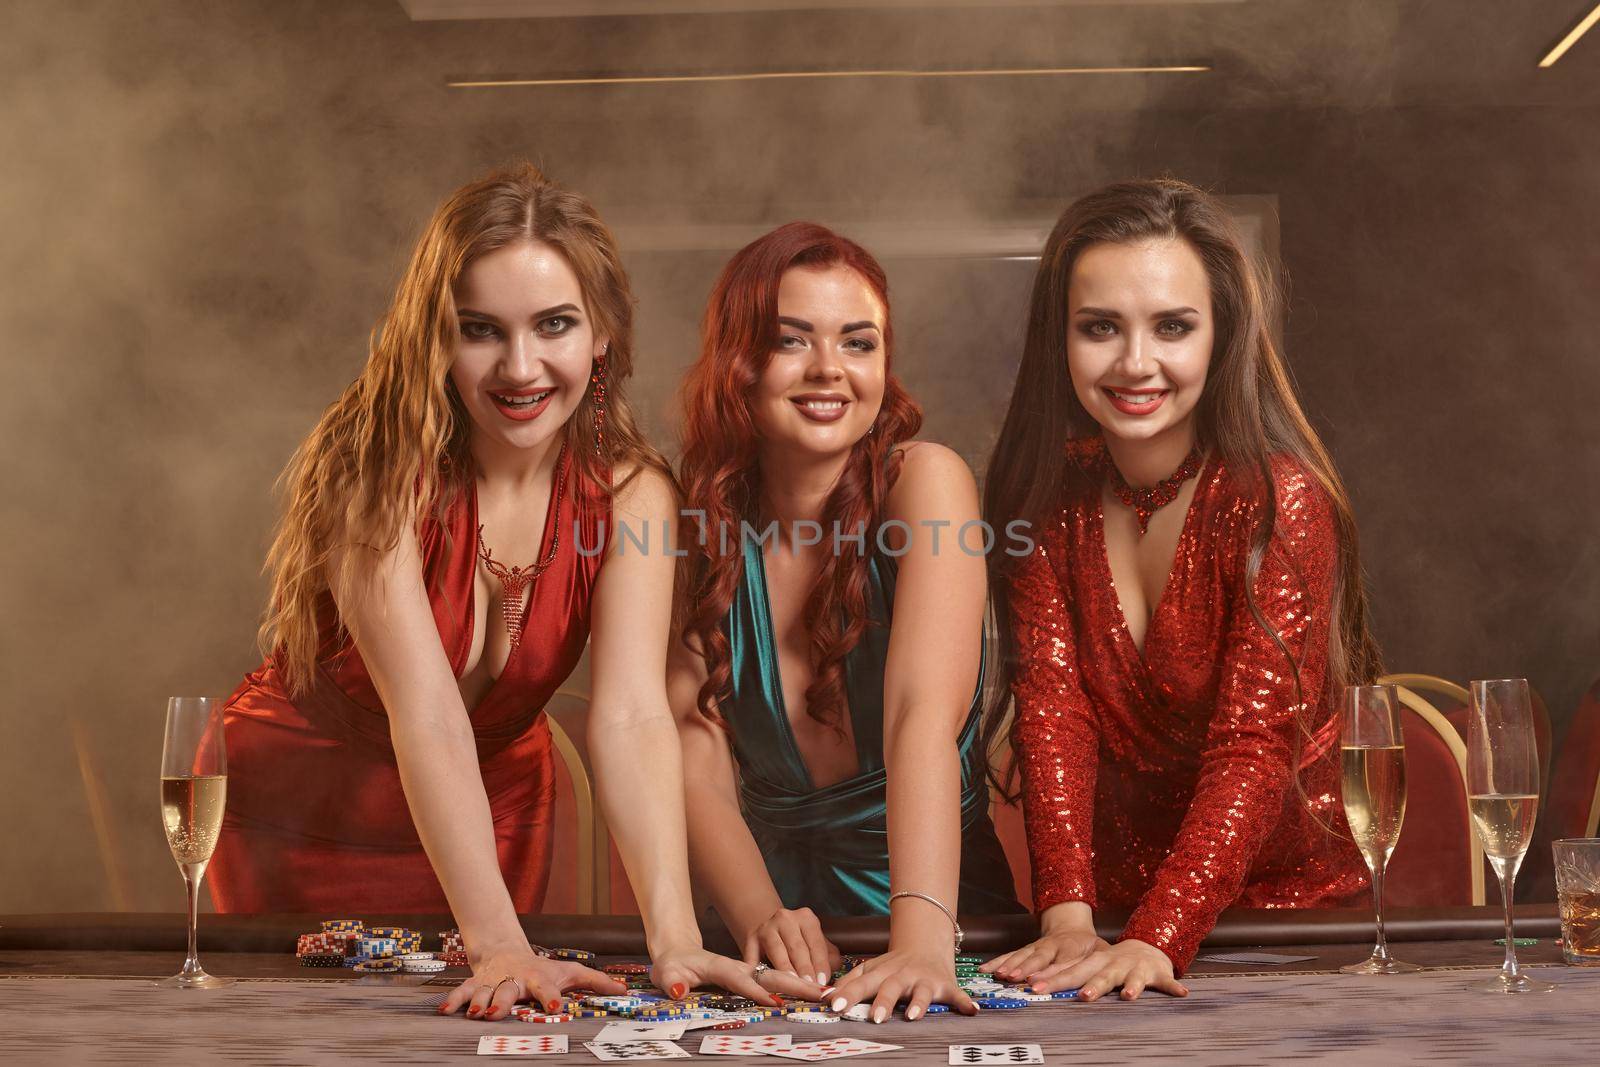 Three beautiful women are playing poker at casino. They are celebrating their win, looking at the camera and smiling, holding some chips and posing at the table against a smoke background. Cards, money, alcohol, gambling, entertainment concept.